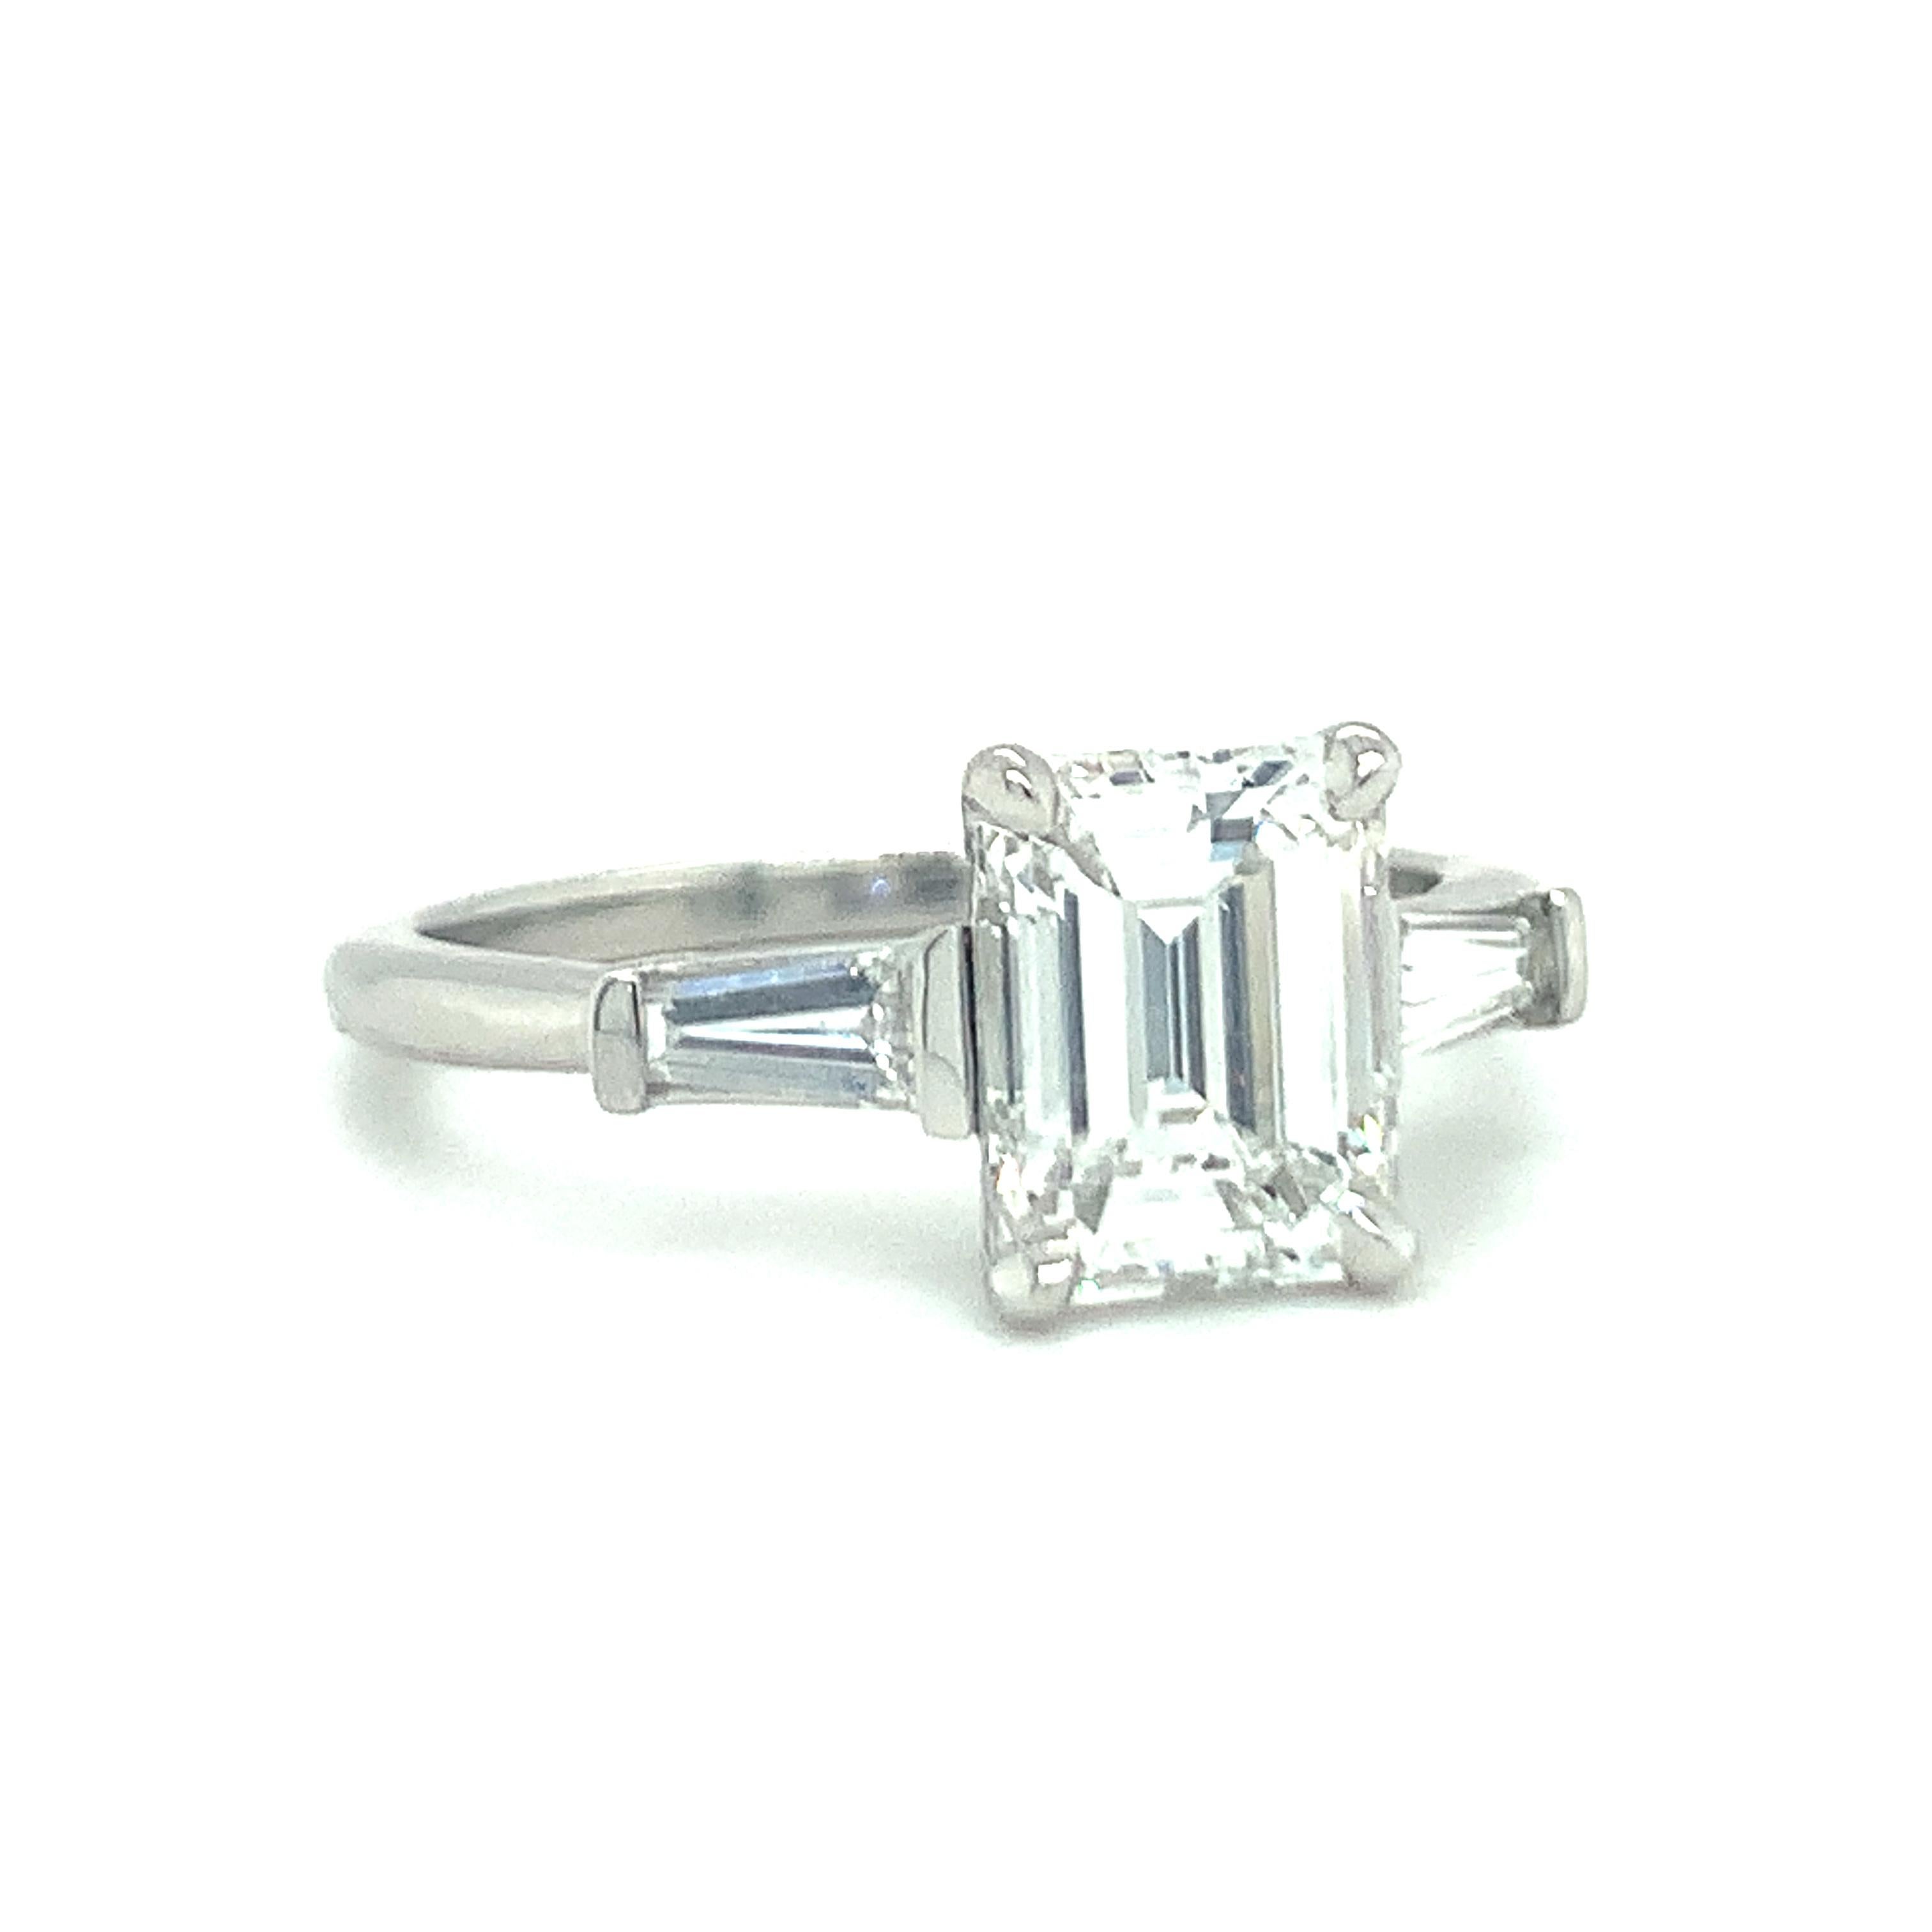 One GIA certified 2.09 ct. diamond platinum engagement ring centering one prong set, emerald cut diamond weighing 2.09 ct. with H color and VS-1 clarity. Flanked by two tapered baguette cut diamonds weighing 0.50 ct. total with G-H color and VS-1